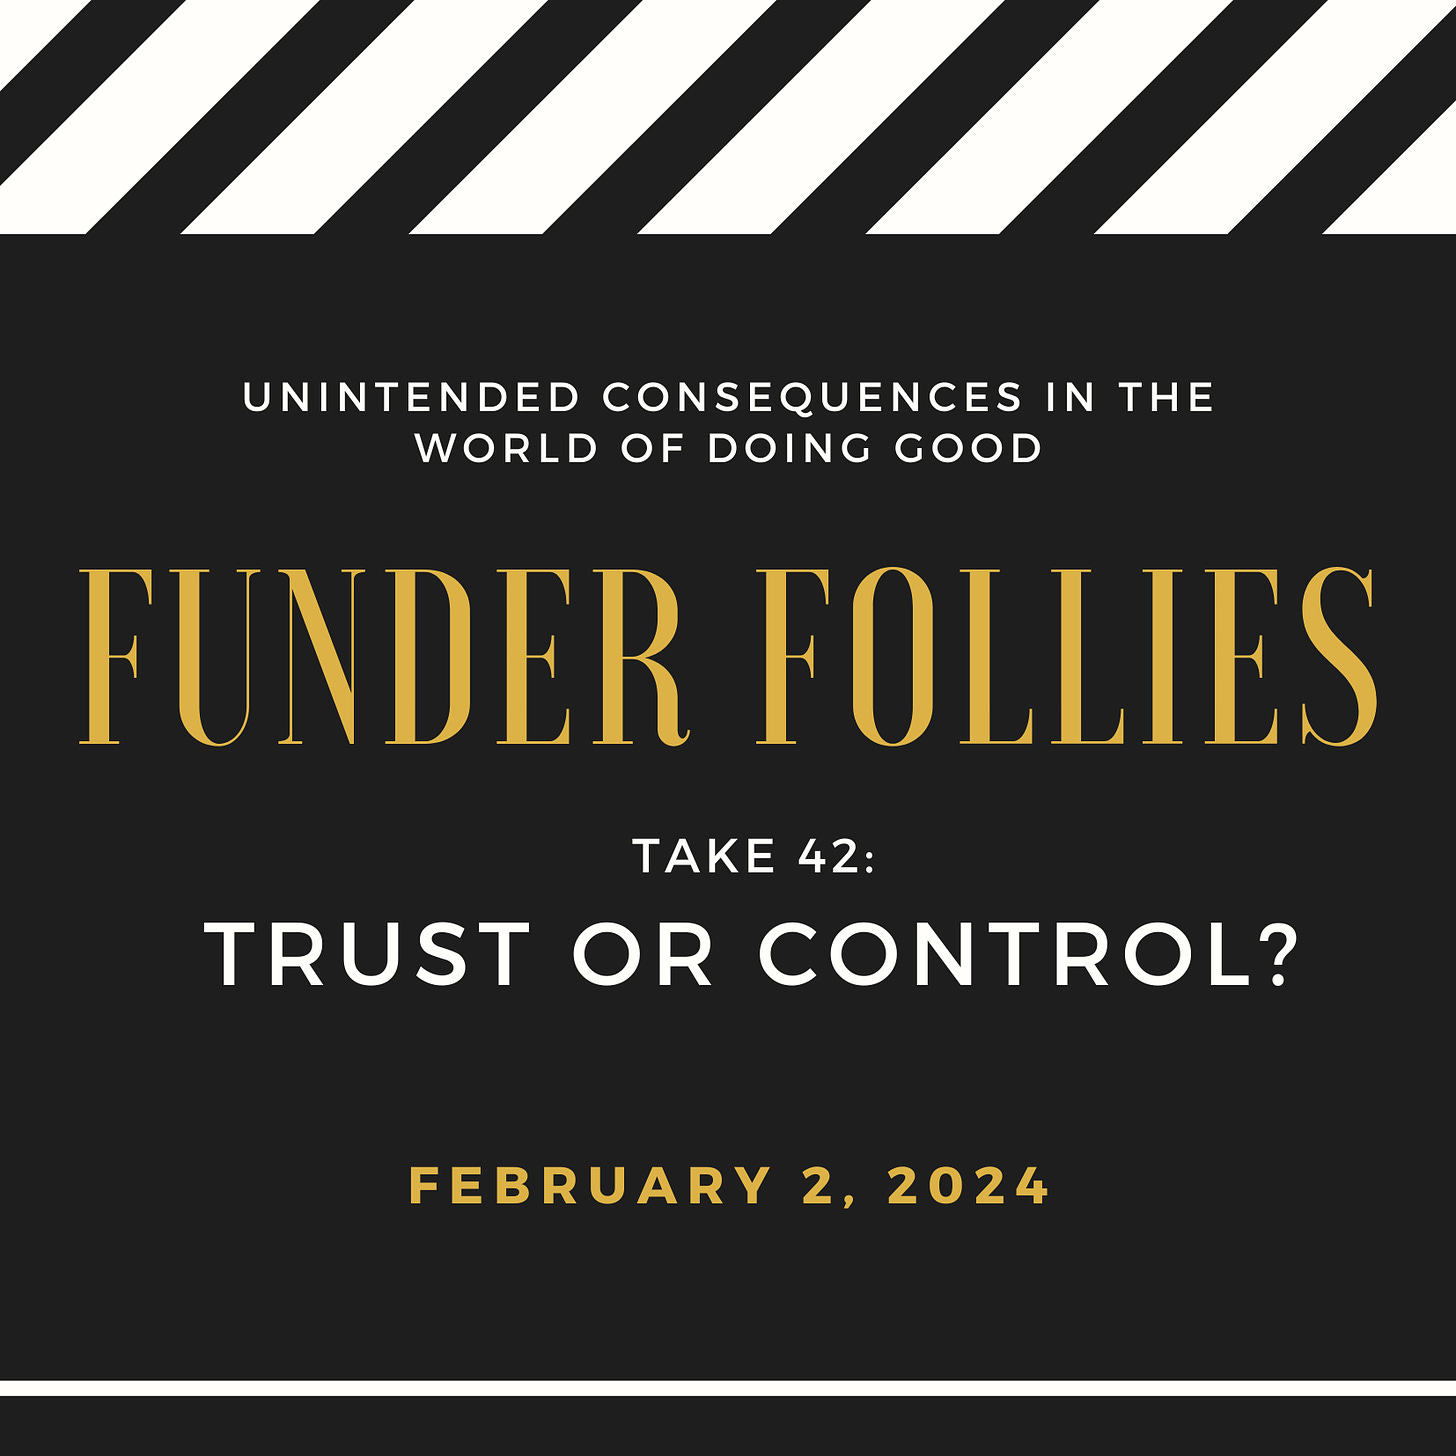 black and white film clapper board showing Funder Follies, Unintended Consequences of Doing Good, Take # 42: Trust or Control? February 2, 2024